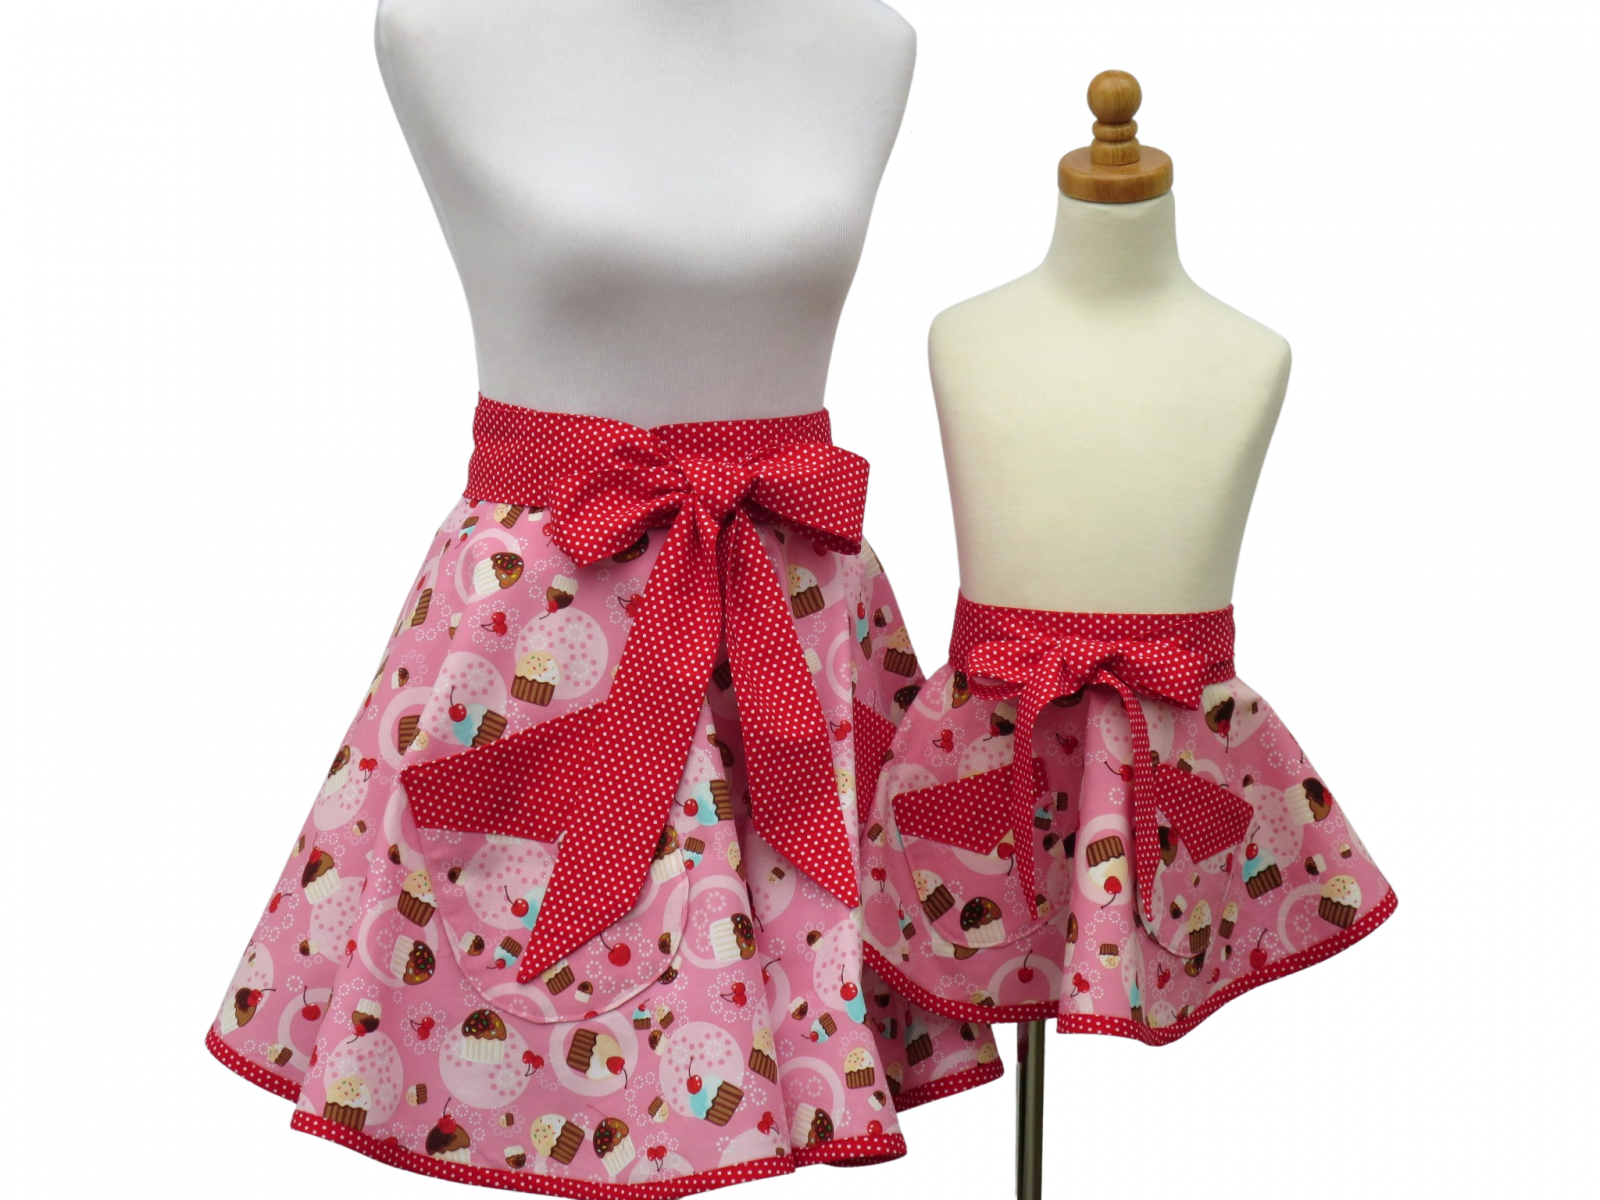 https://www.stitchedbybeverly.com/sites/stitchedbybeverly.indiemade.com/files/imagecache/im_clientsite_product_zoom/mother_daughter_pink_half_cupcake_apron_set_front_view_tied_in_front.jpg